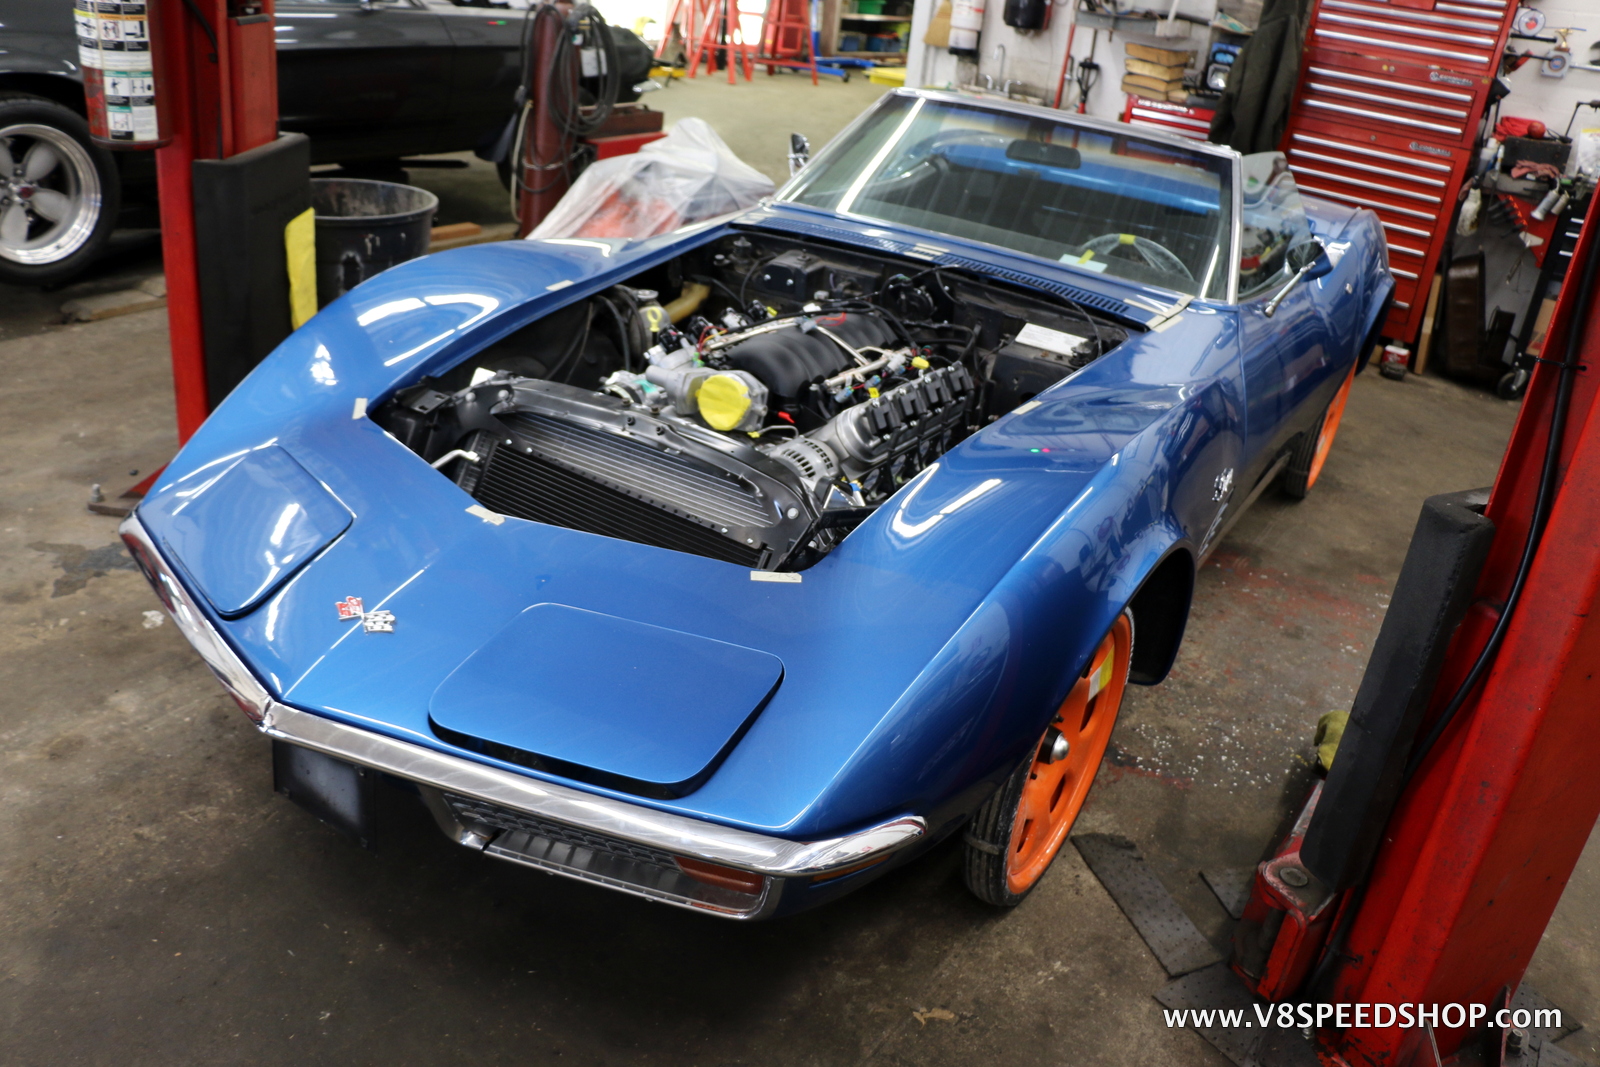 1972 Chevrolet Corvette Upgrades at the V8 Speed and Resto Shop